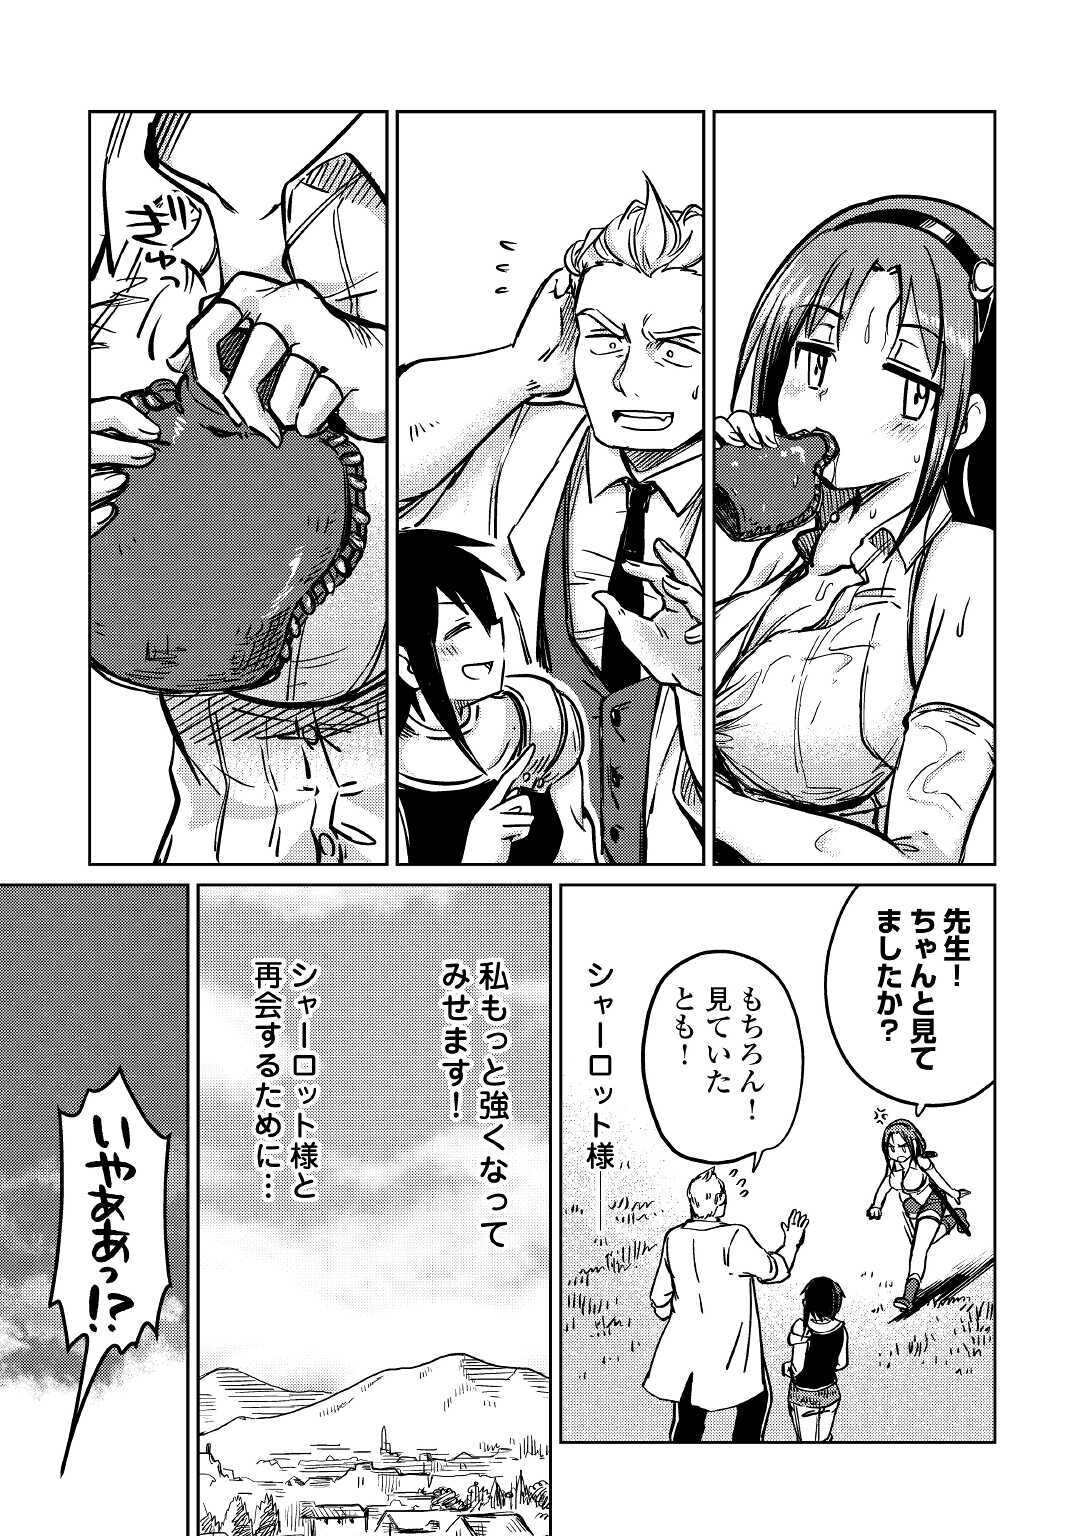 The Former Structural Researcher’s Story of Otherworldly Adventure 第27話 - Page 19